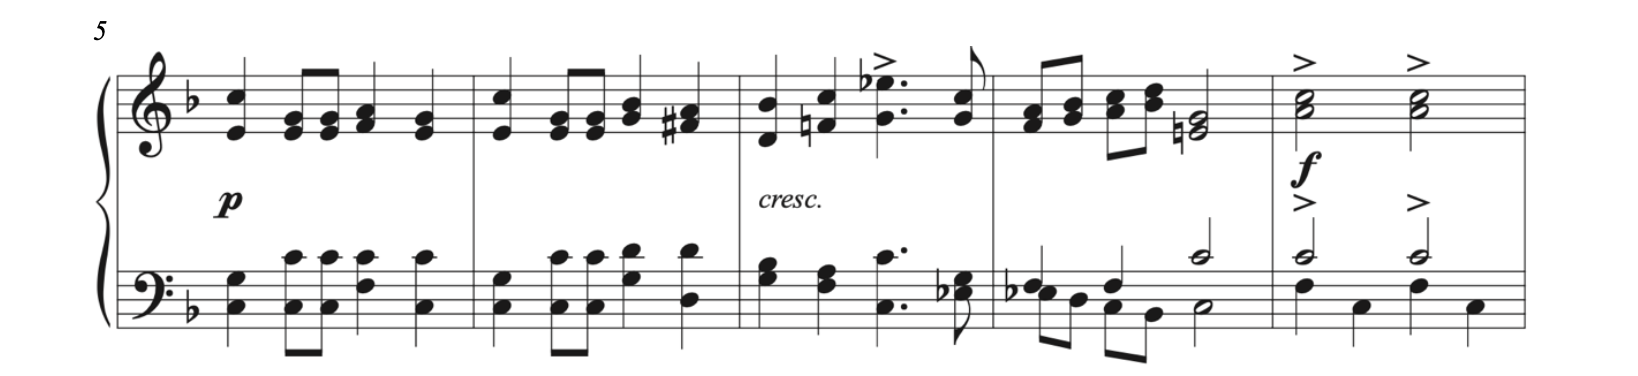 Example Smyth, The March of the Women. The example is written for the piano and begins on measure 5. It is five measures long.